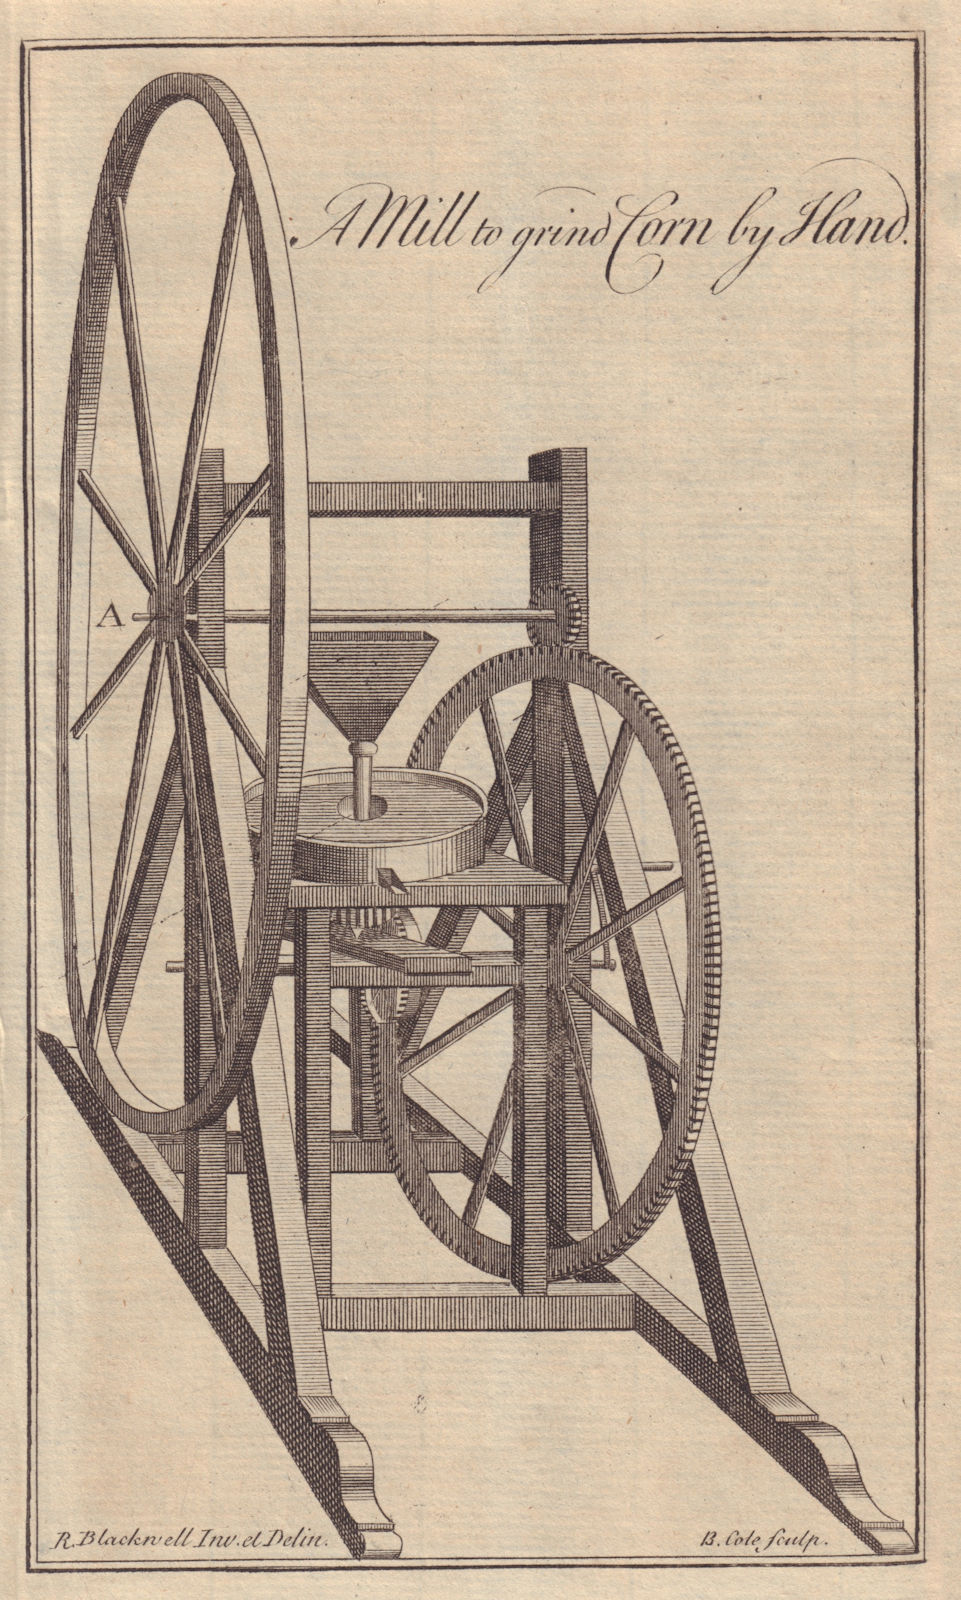 Associate Product A Mill to grind Corn by Hand. Engineering. GENTS MAG 1758 old antique print